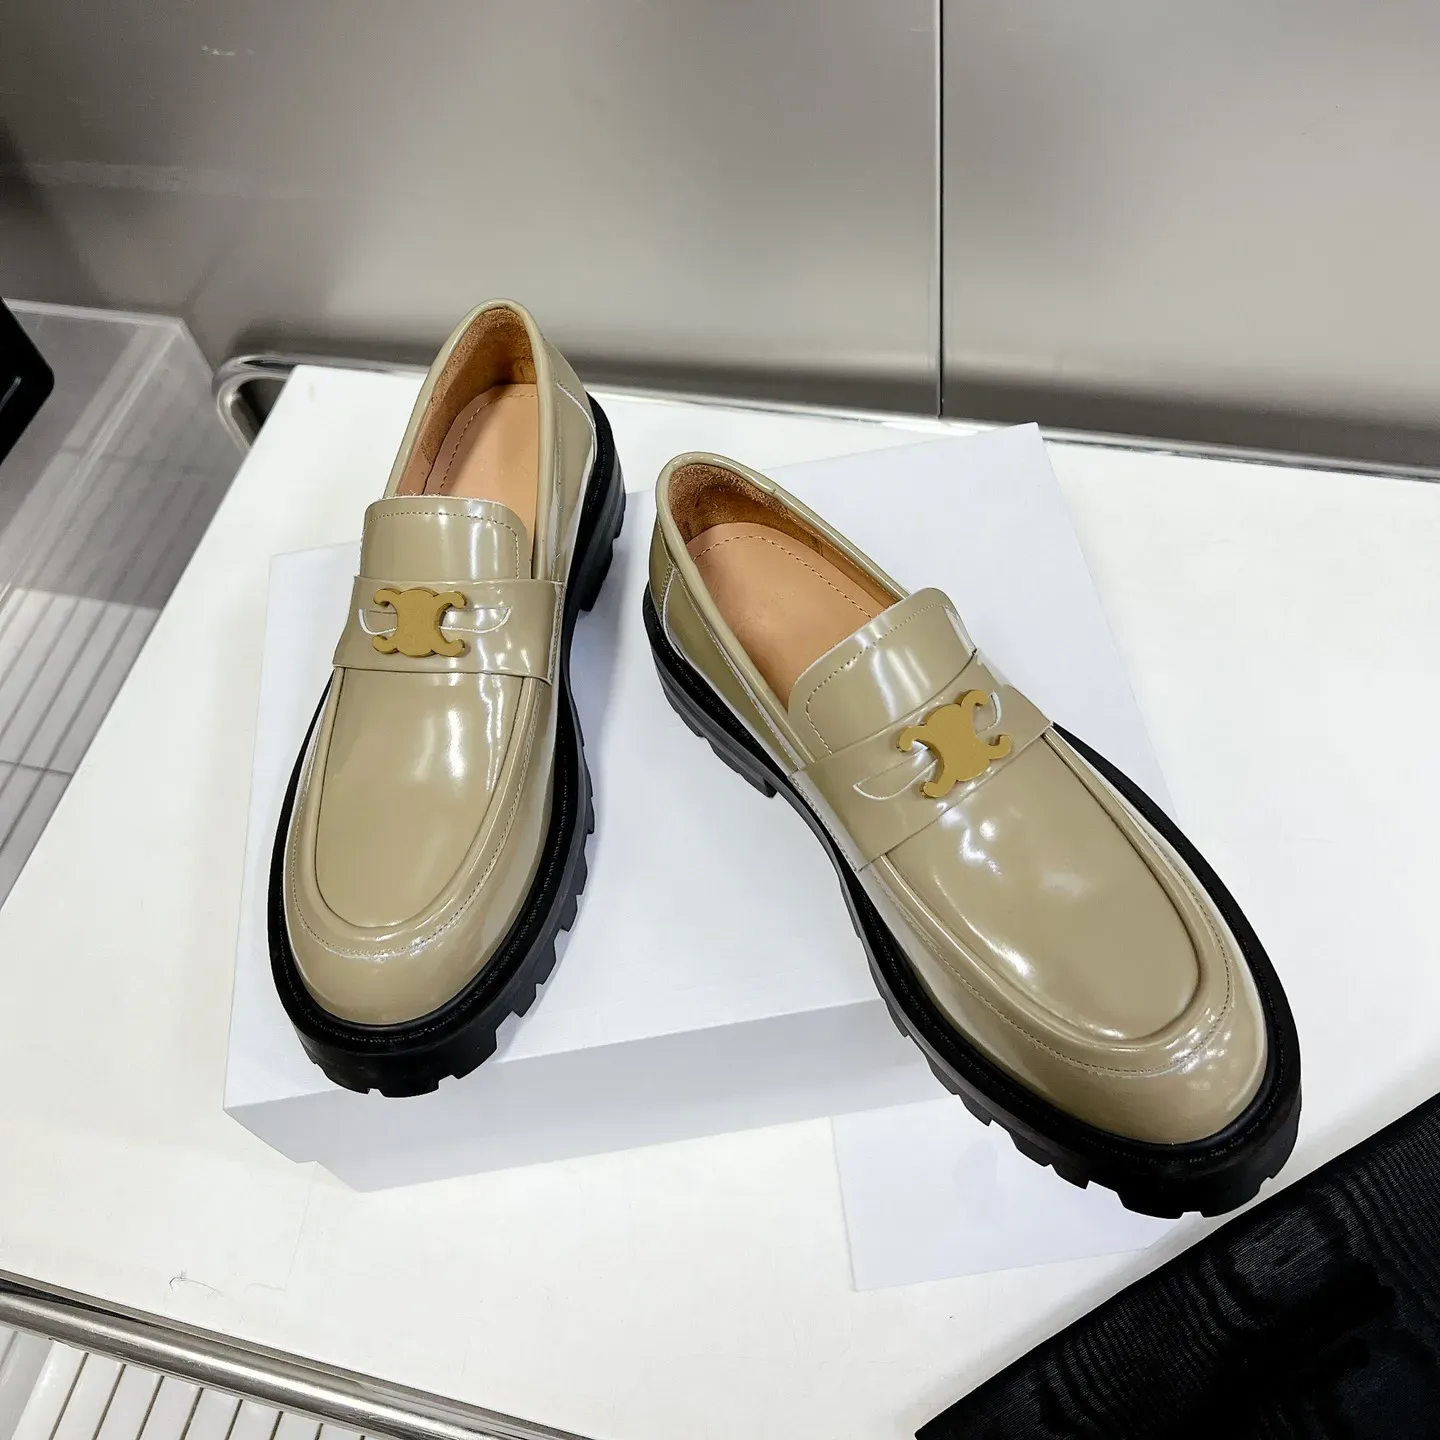 Top Designers Woman Casual shoes Dress shoes Leather shoes Luxury fashion Arc de Triomphe Loafers Goat leather insole Cowhide leather Shoes flats wholesale